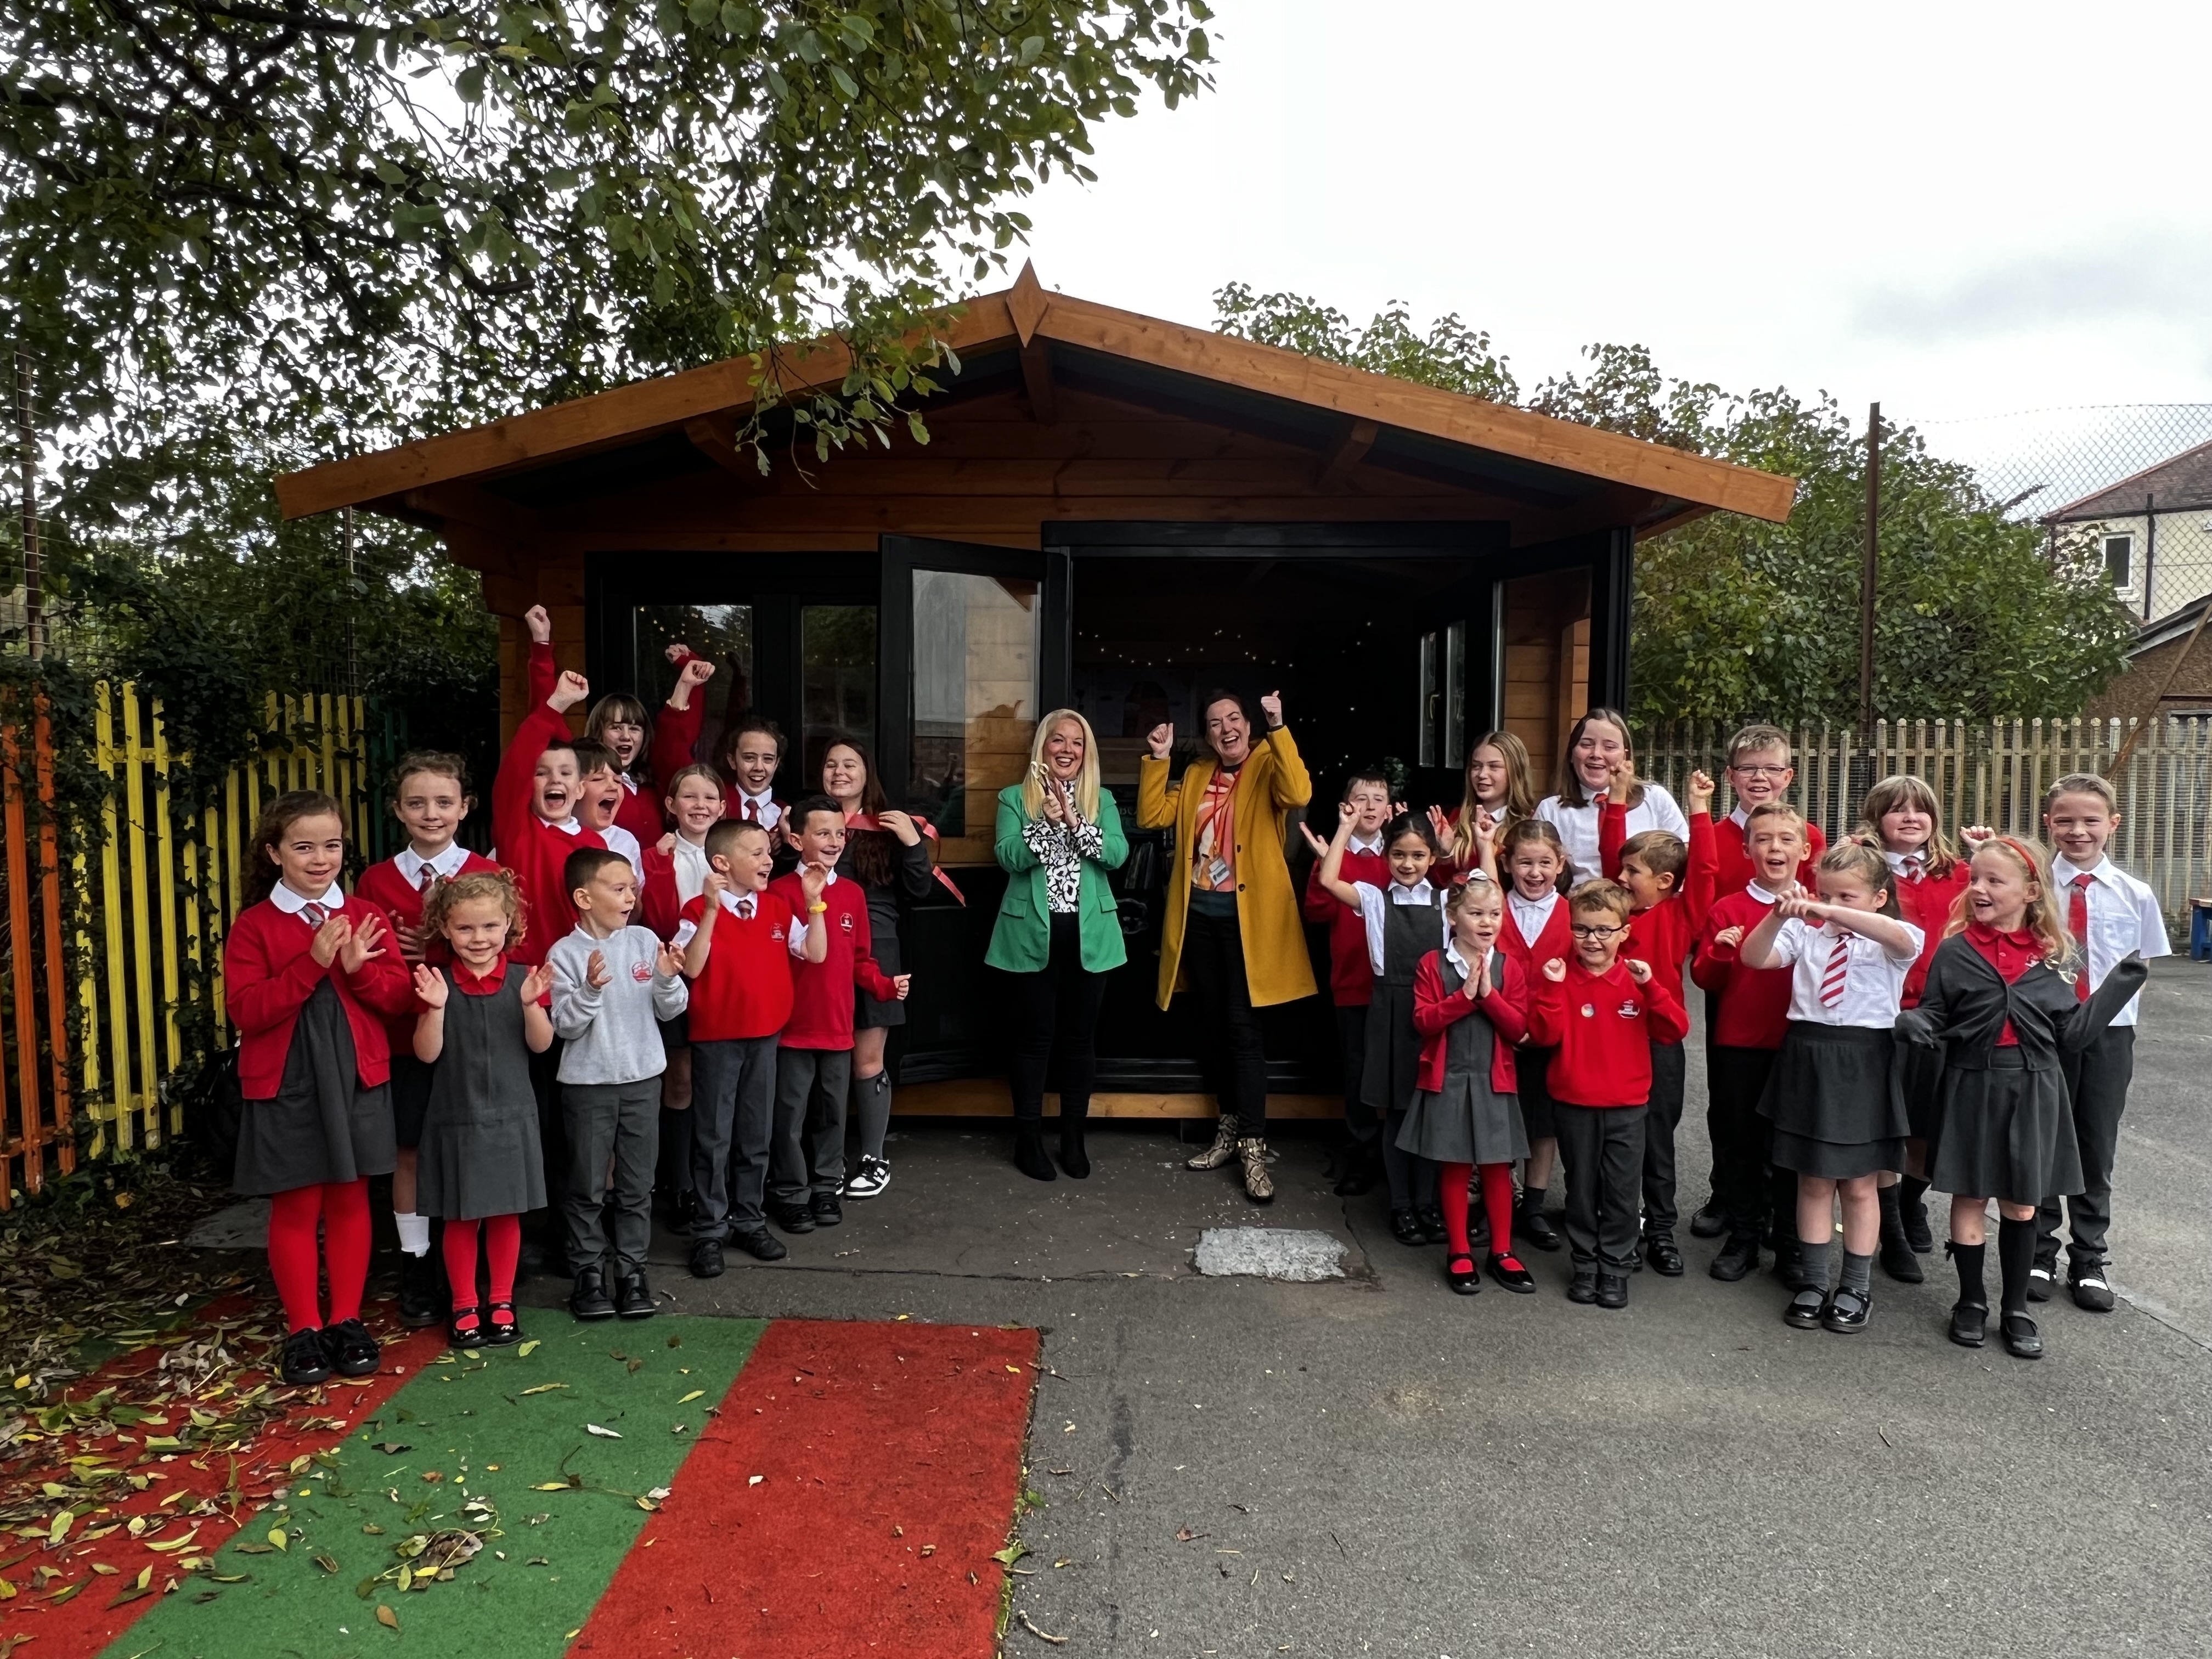 Councillor Clare Steel, Convener of Educational Services, visited the school today to officially open the hut and speak to children who will benefit from the facility.